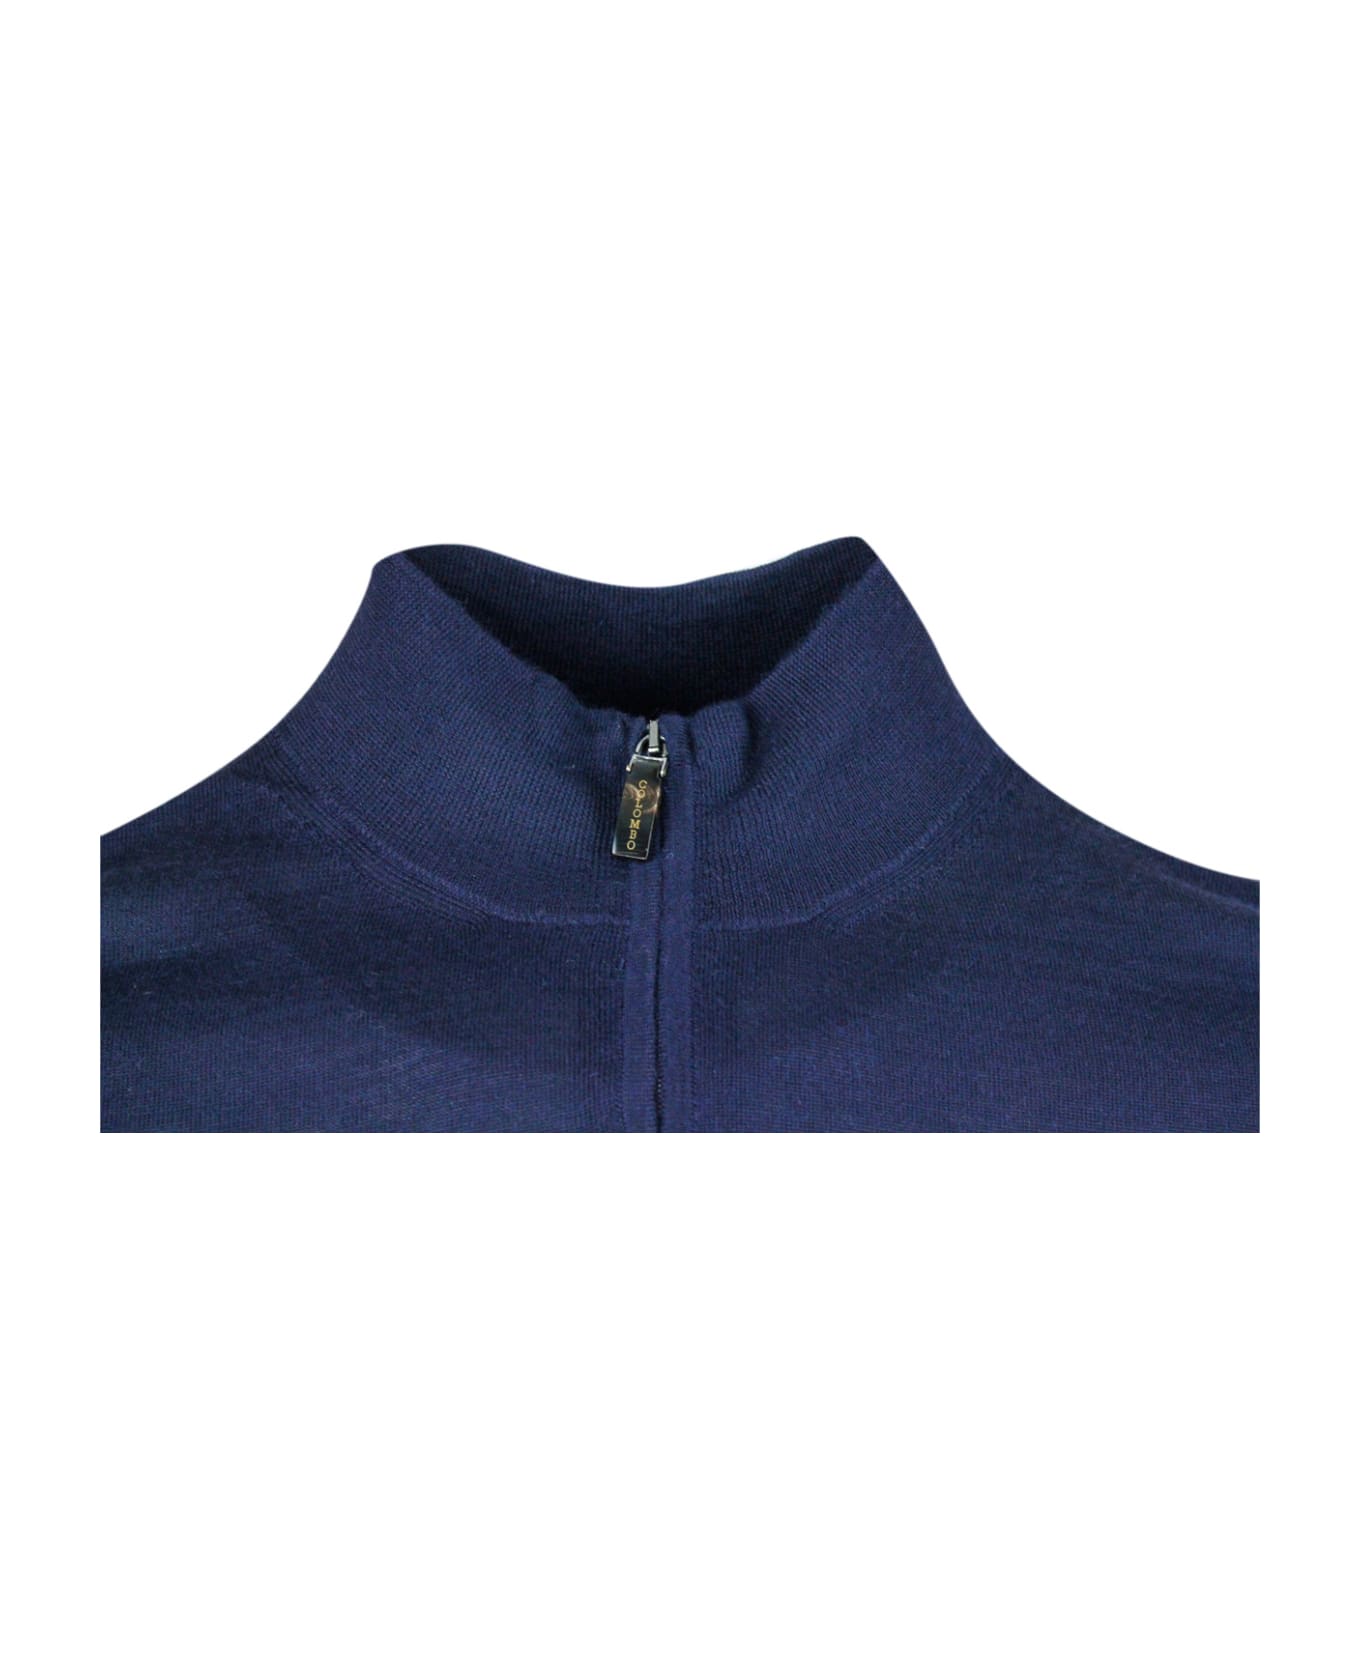 Colombo Light Half-zip Long-sleeved Sweater In Fine 100% Cashmere And Silk With Special Processing On The Profile Of The Neck - Blu navy ニットウェア